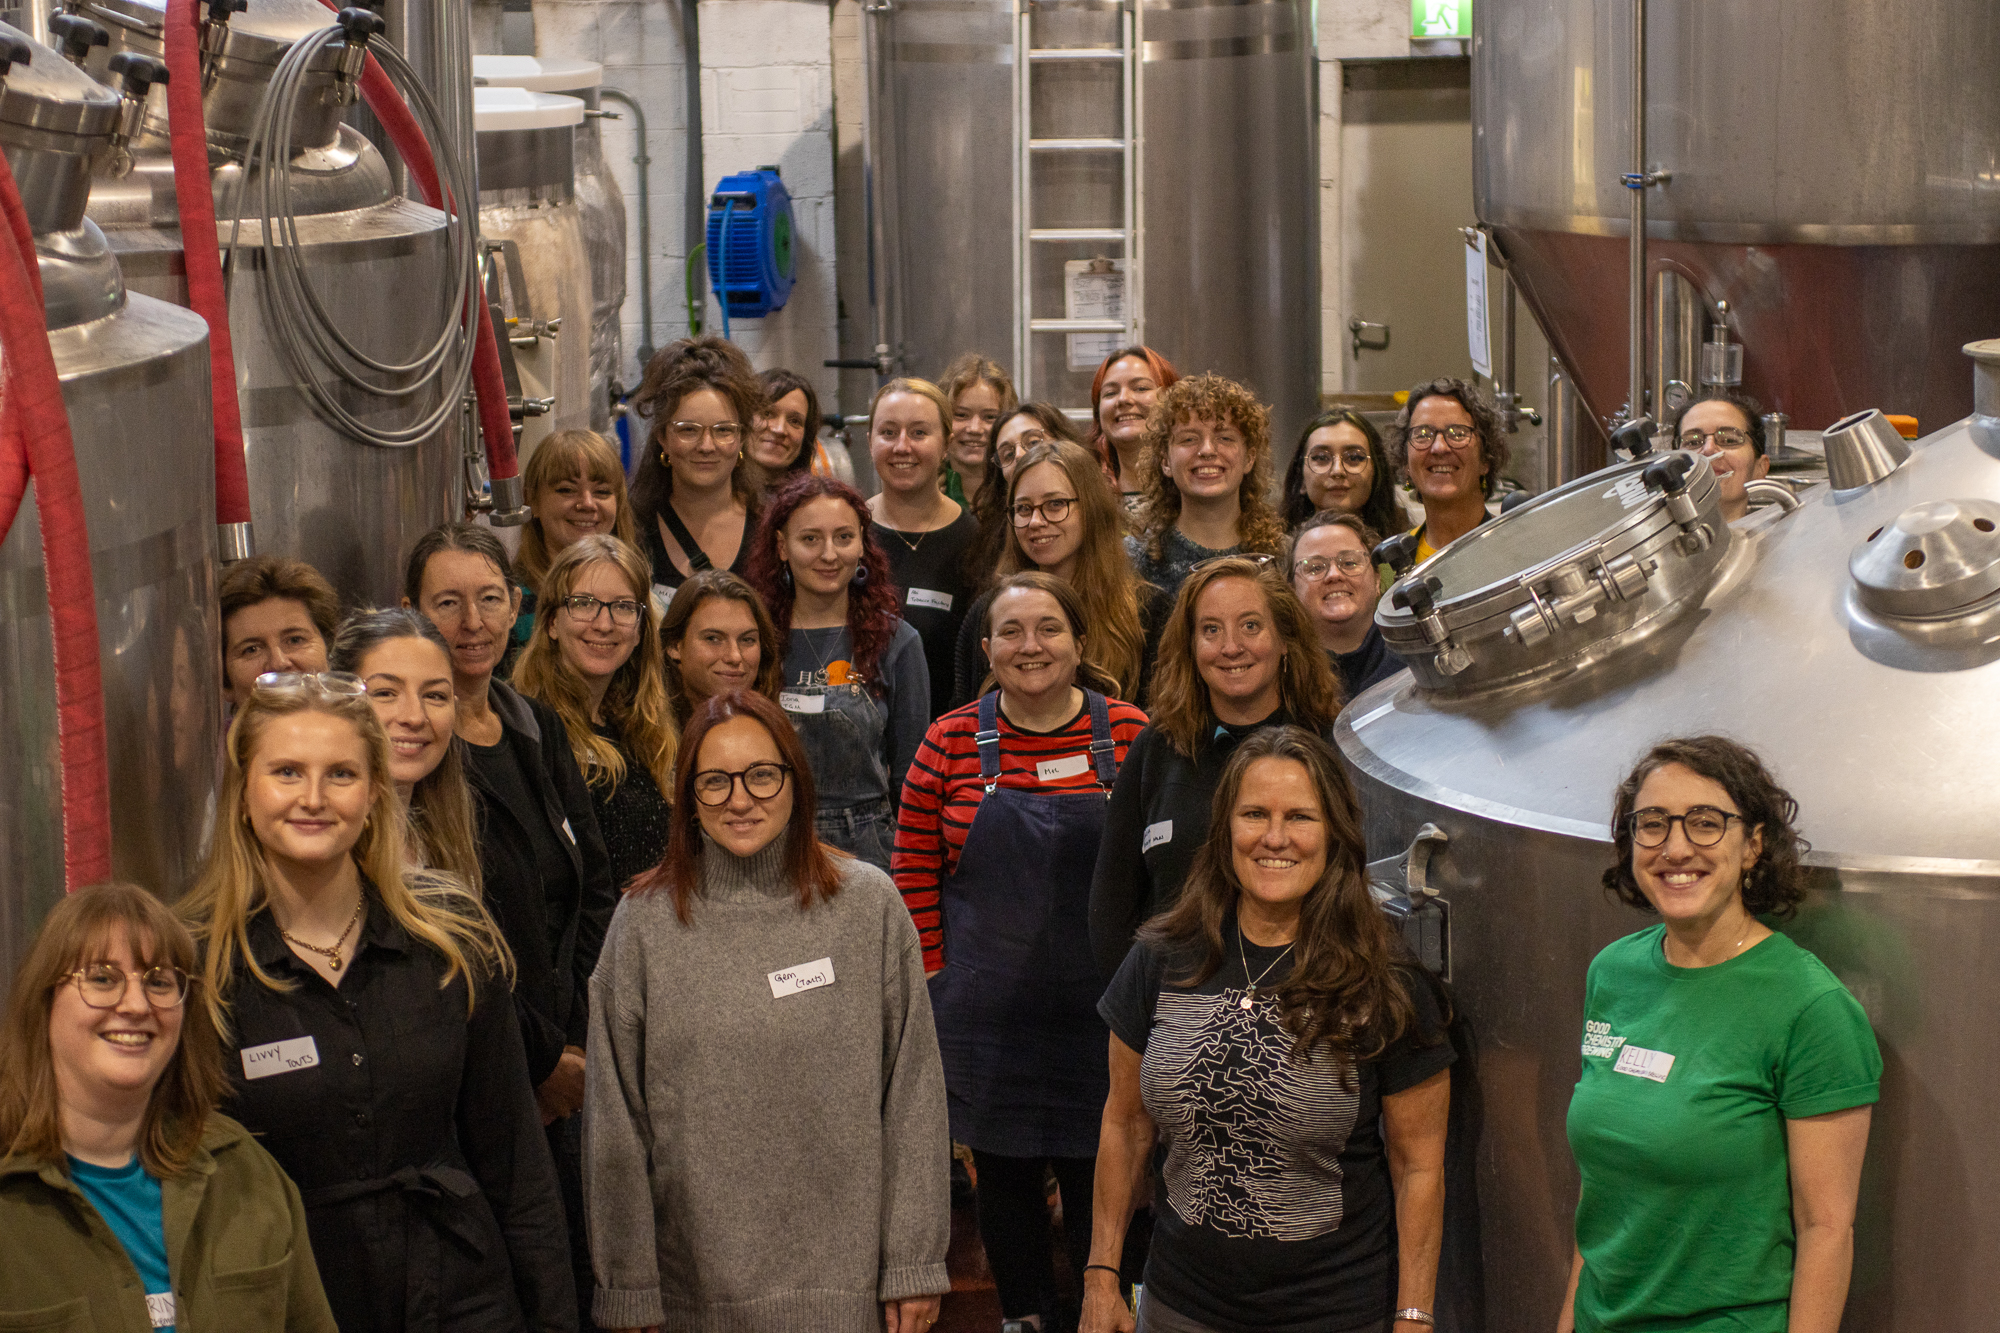 30+ women at GCB for the She Drinks Beer open brewday